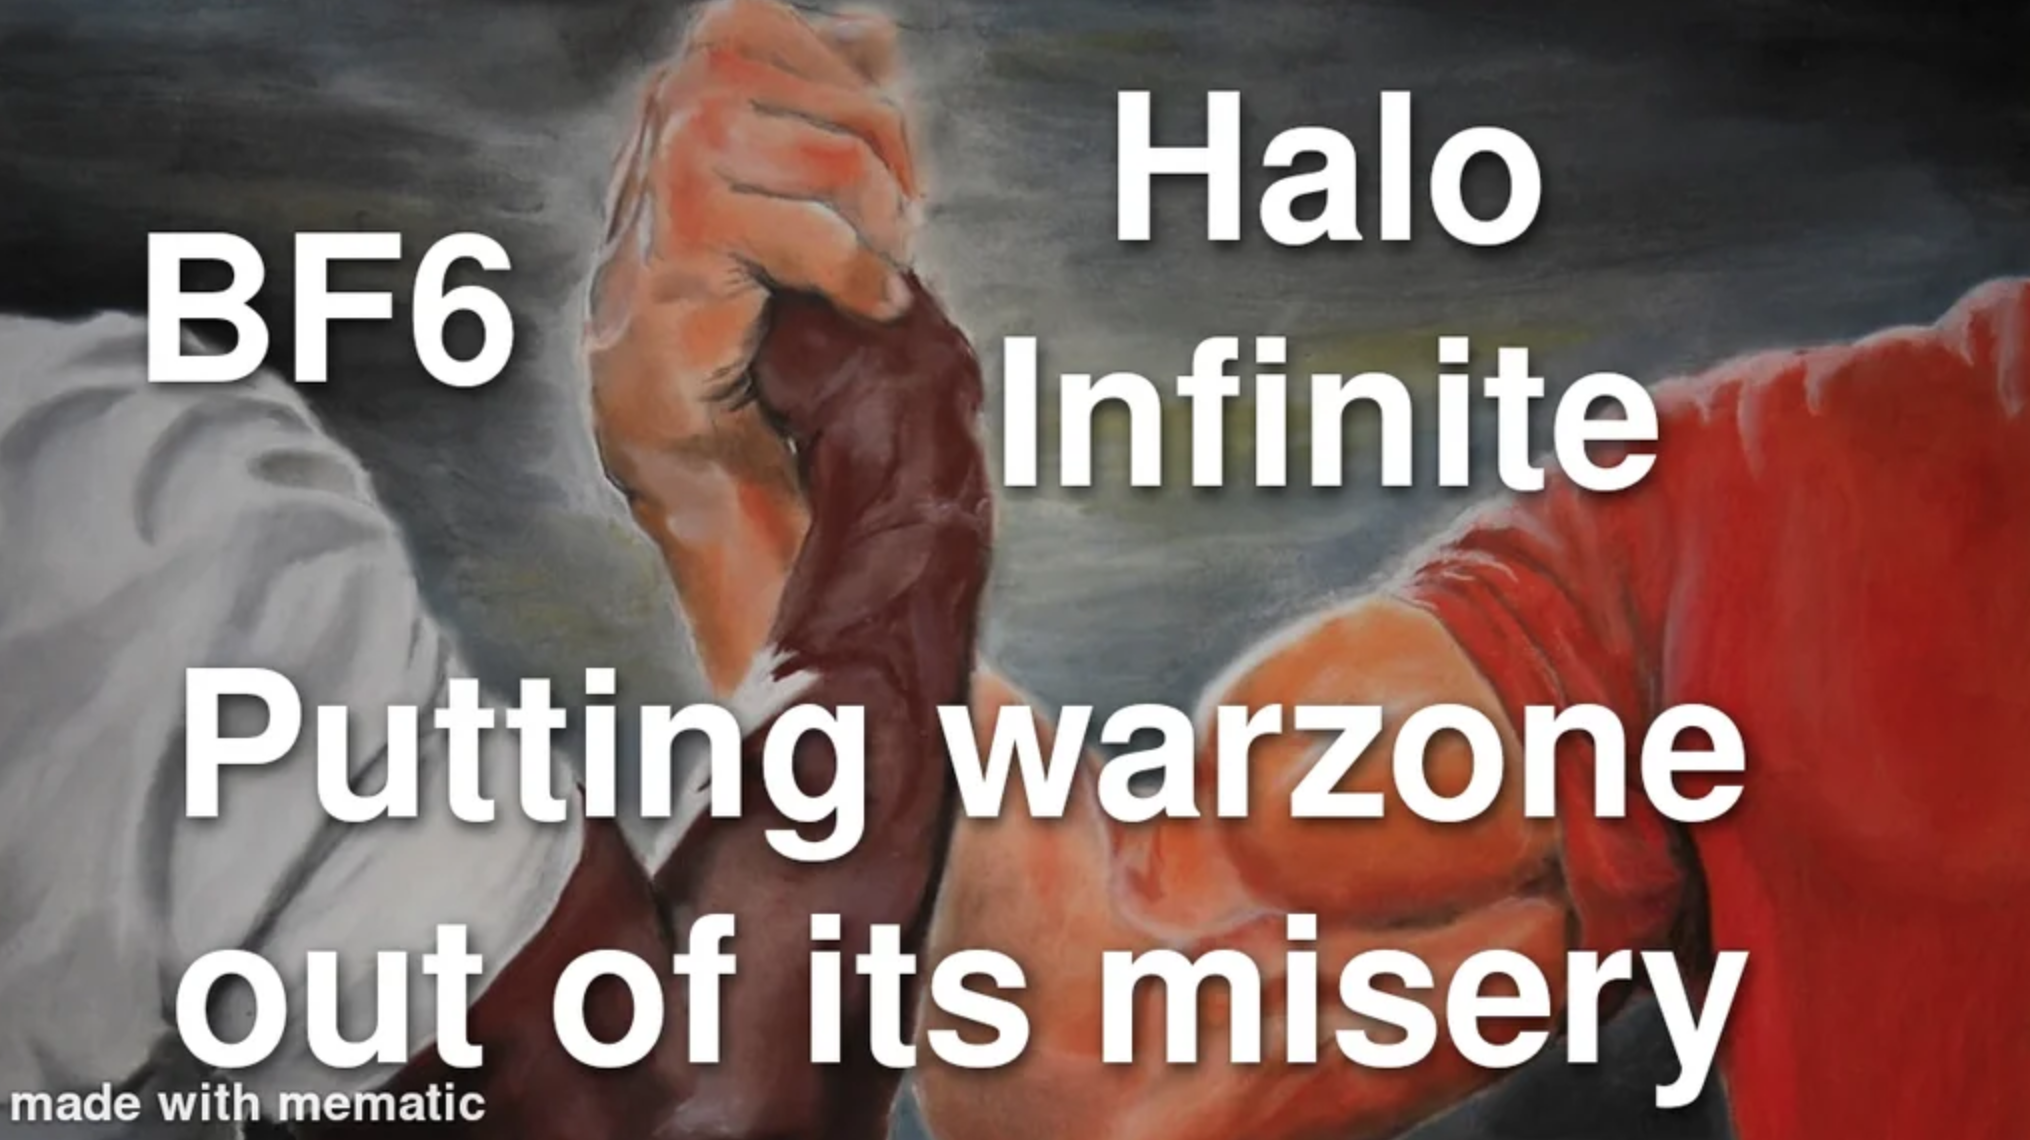 funny gaming memes - muscle - BF6 Halo Infinite Putting warzone out of its misery made with mematic